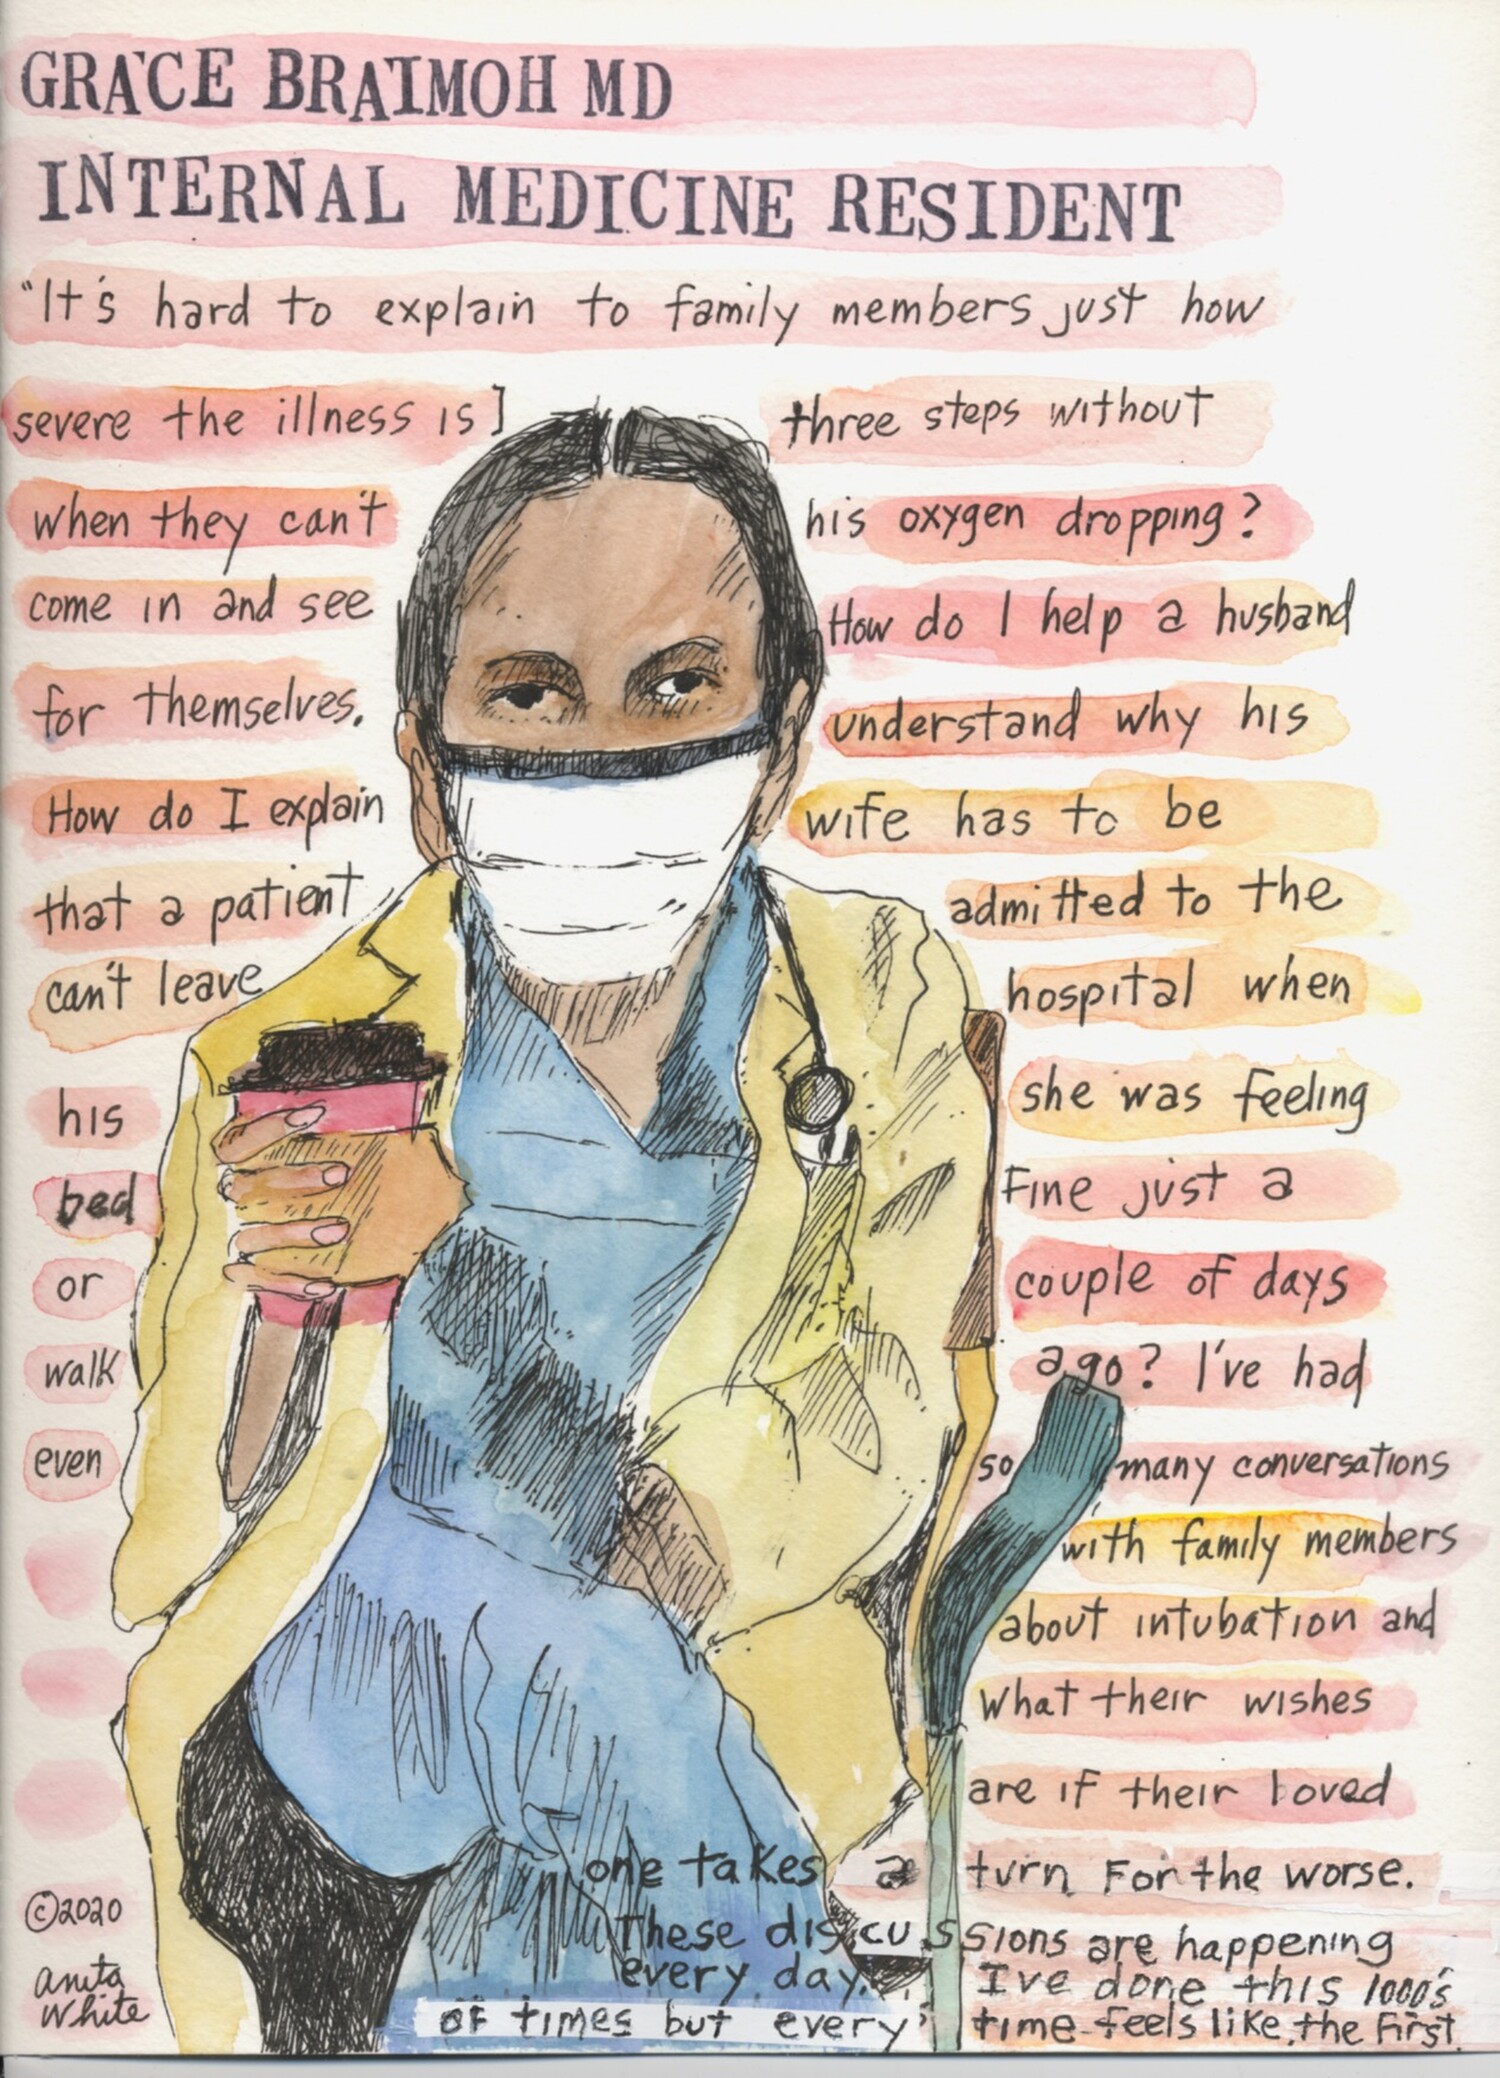 watercolor painting of a masked health care worker, holding a cup of coffee, over a narrative of her thoughts on being on the front line of the COVID-19 pandemic